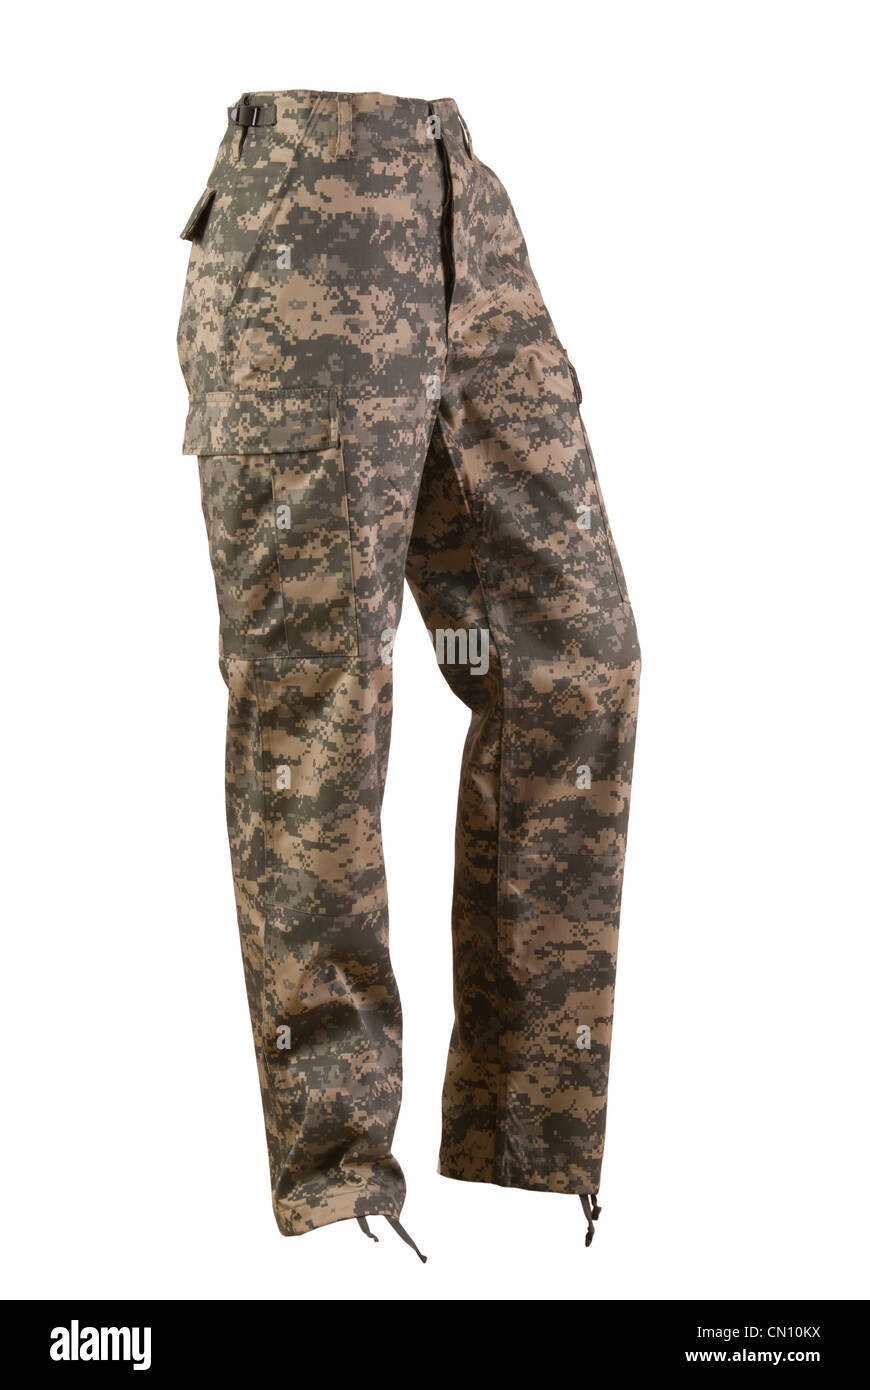 NWT Cargo Pants, Hot Weather, Woodland Camo, Combat Trousers, Vintage, MED  - REG - Simpson Advanced Chiropractic & Medical Center